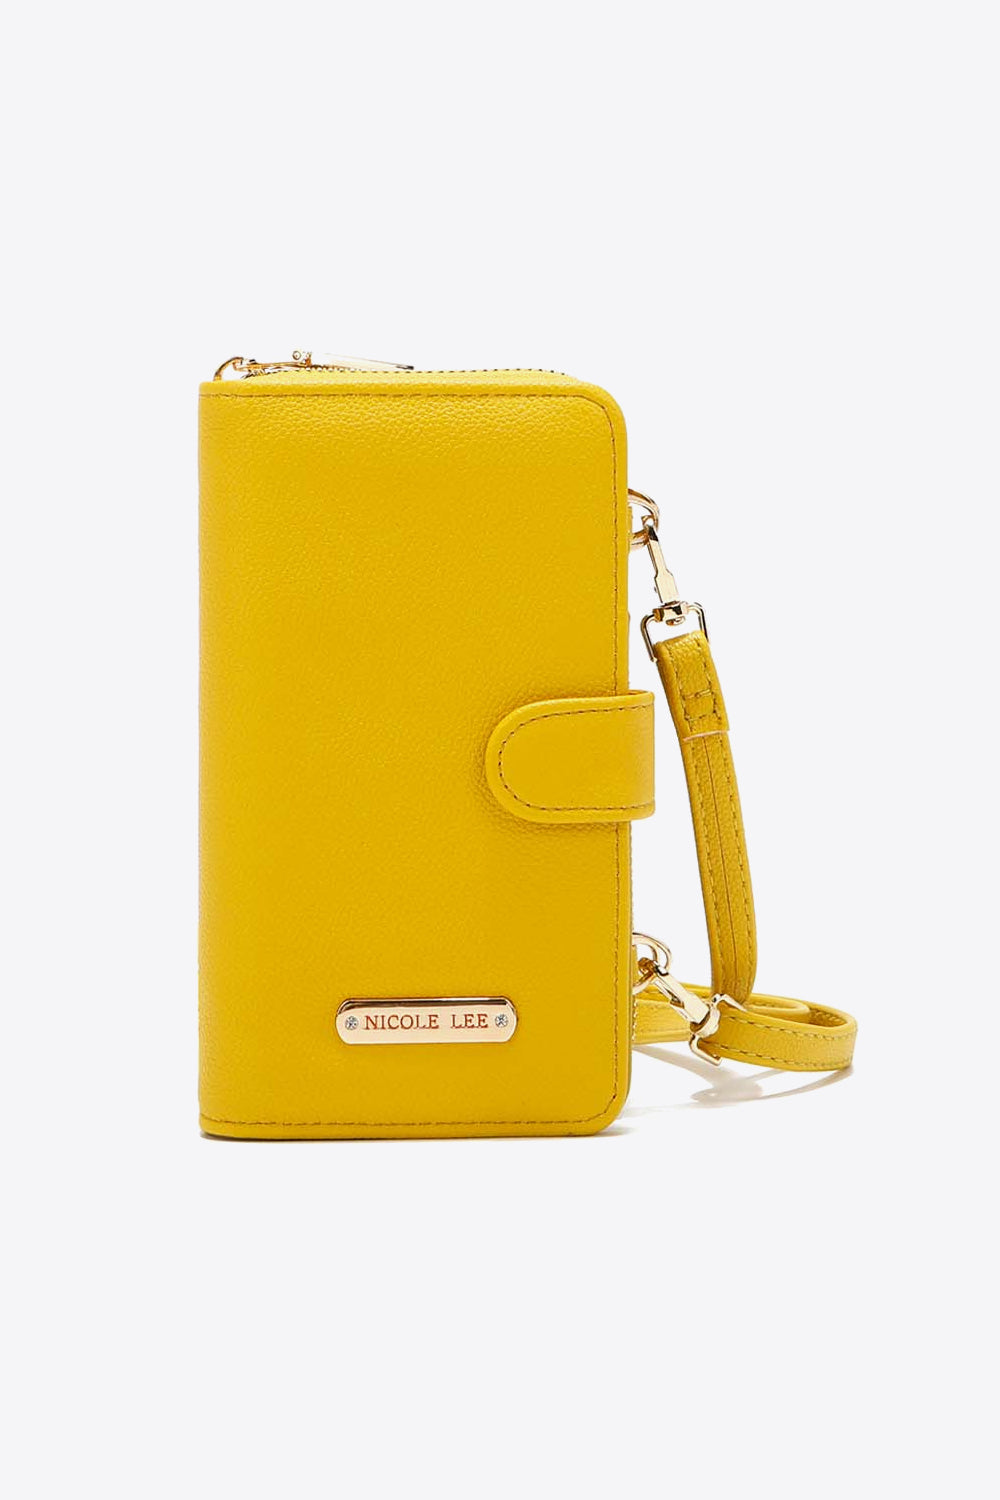 Nicole Lee USA Two-Piece Crossbody Phone Case Wallet Bags & Luggage - Women's Bags - Top-Handle Bags RYSE Clothing Co. Mustard One Size 